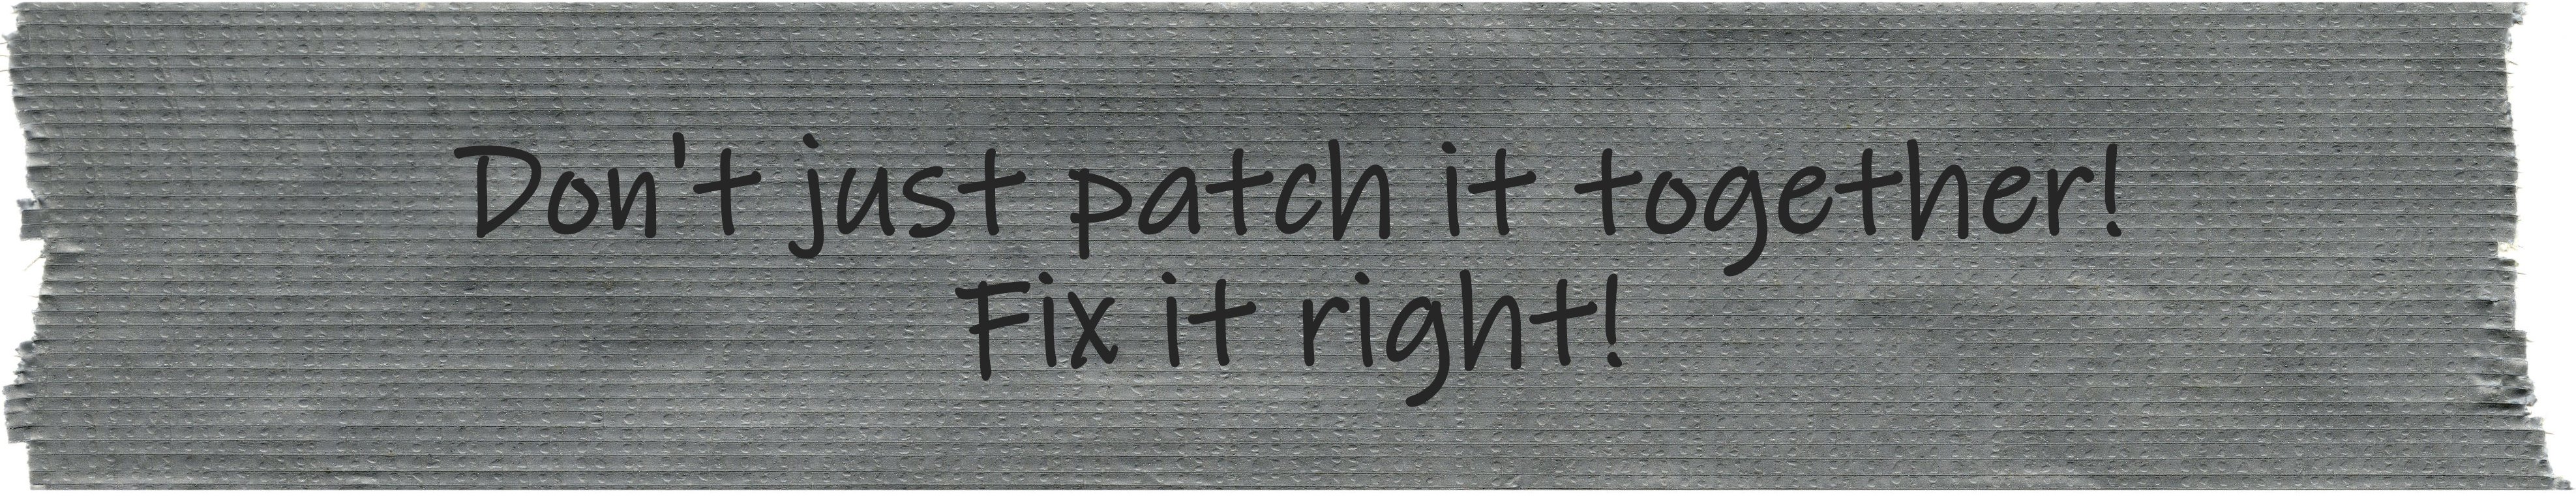 Don't just patch it together! Fix it Right! (handwritten on duct tape)